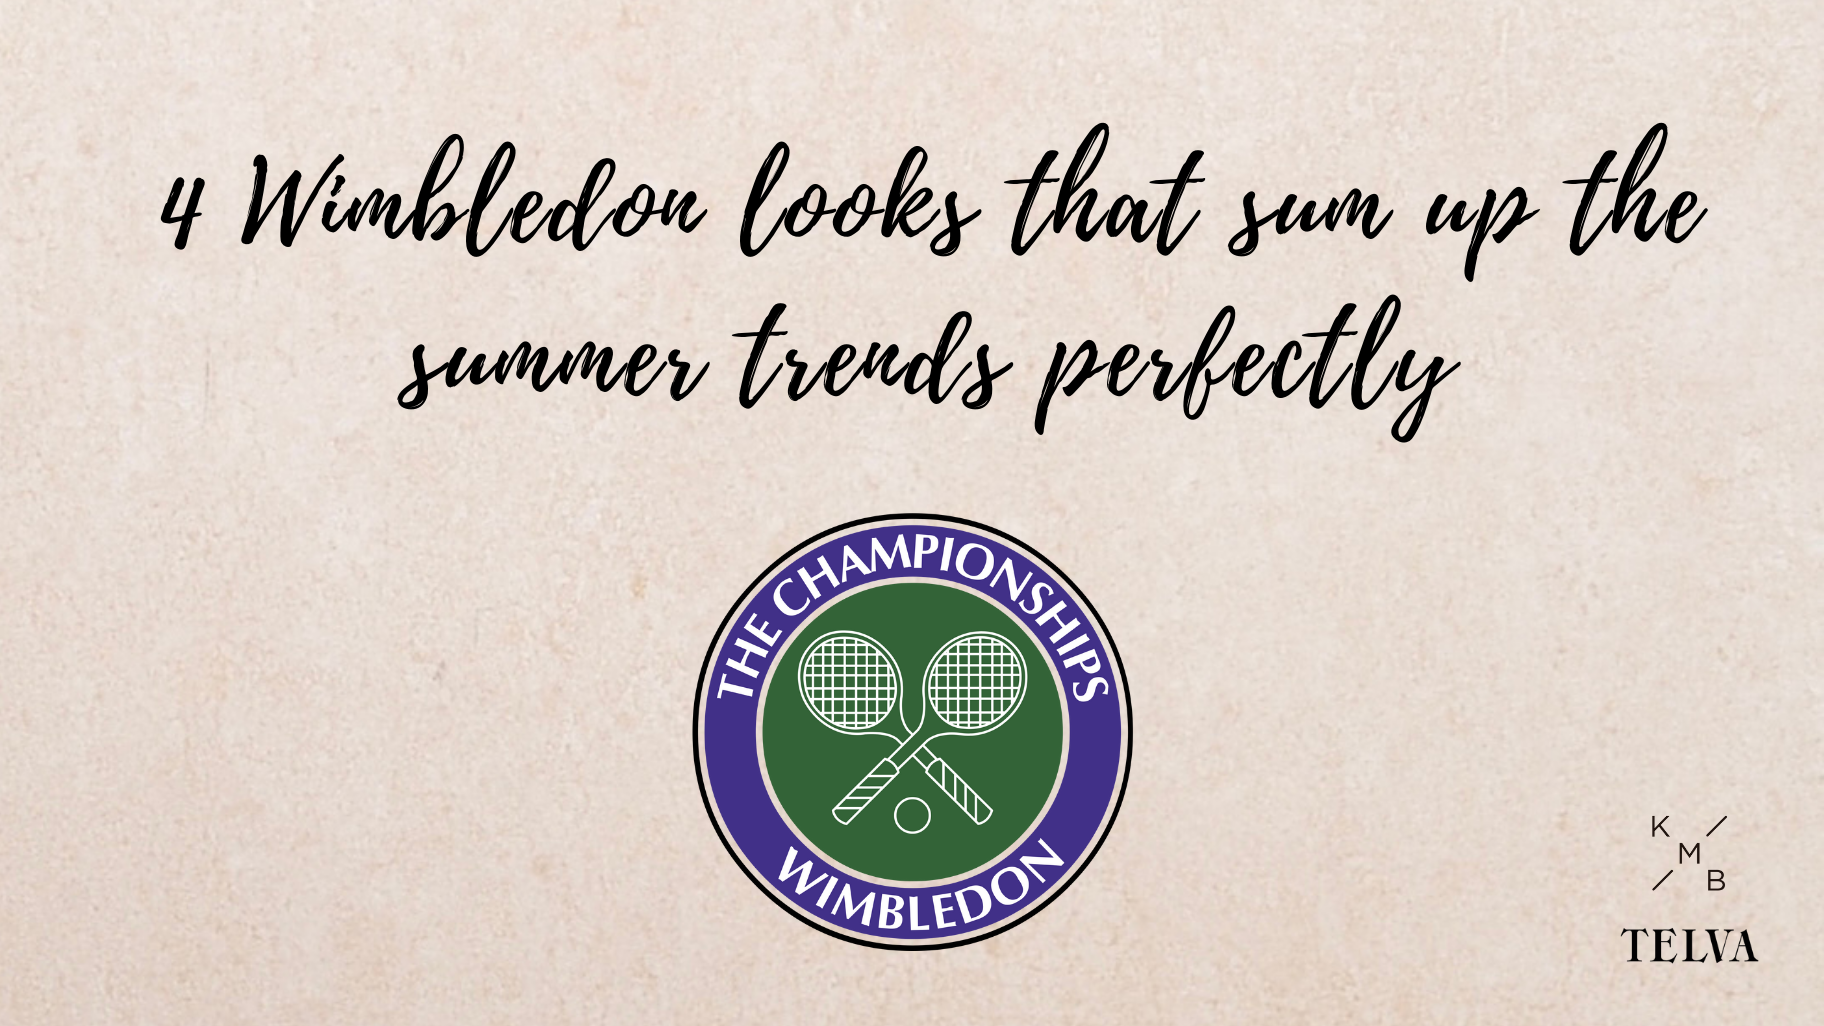 4 Wimbledon looks that sum up the summer trends perfectly